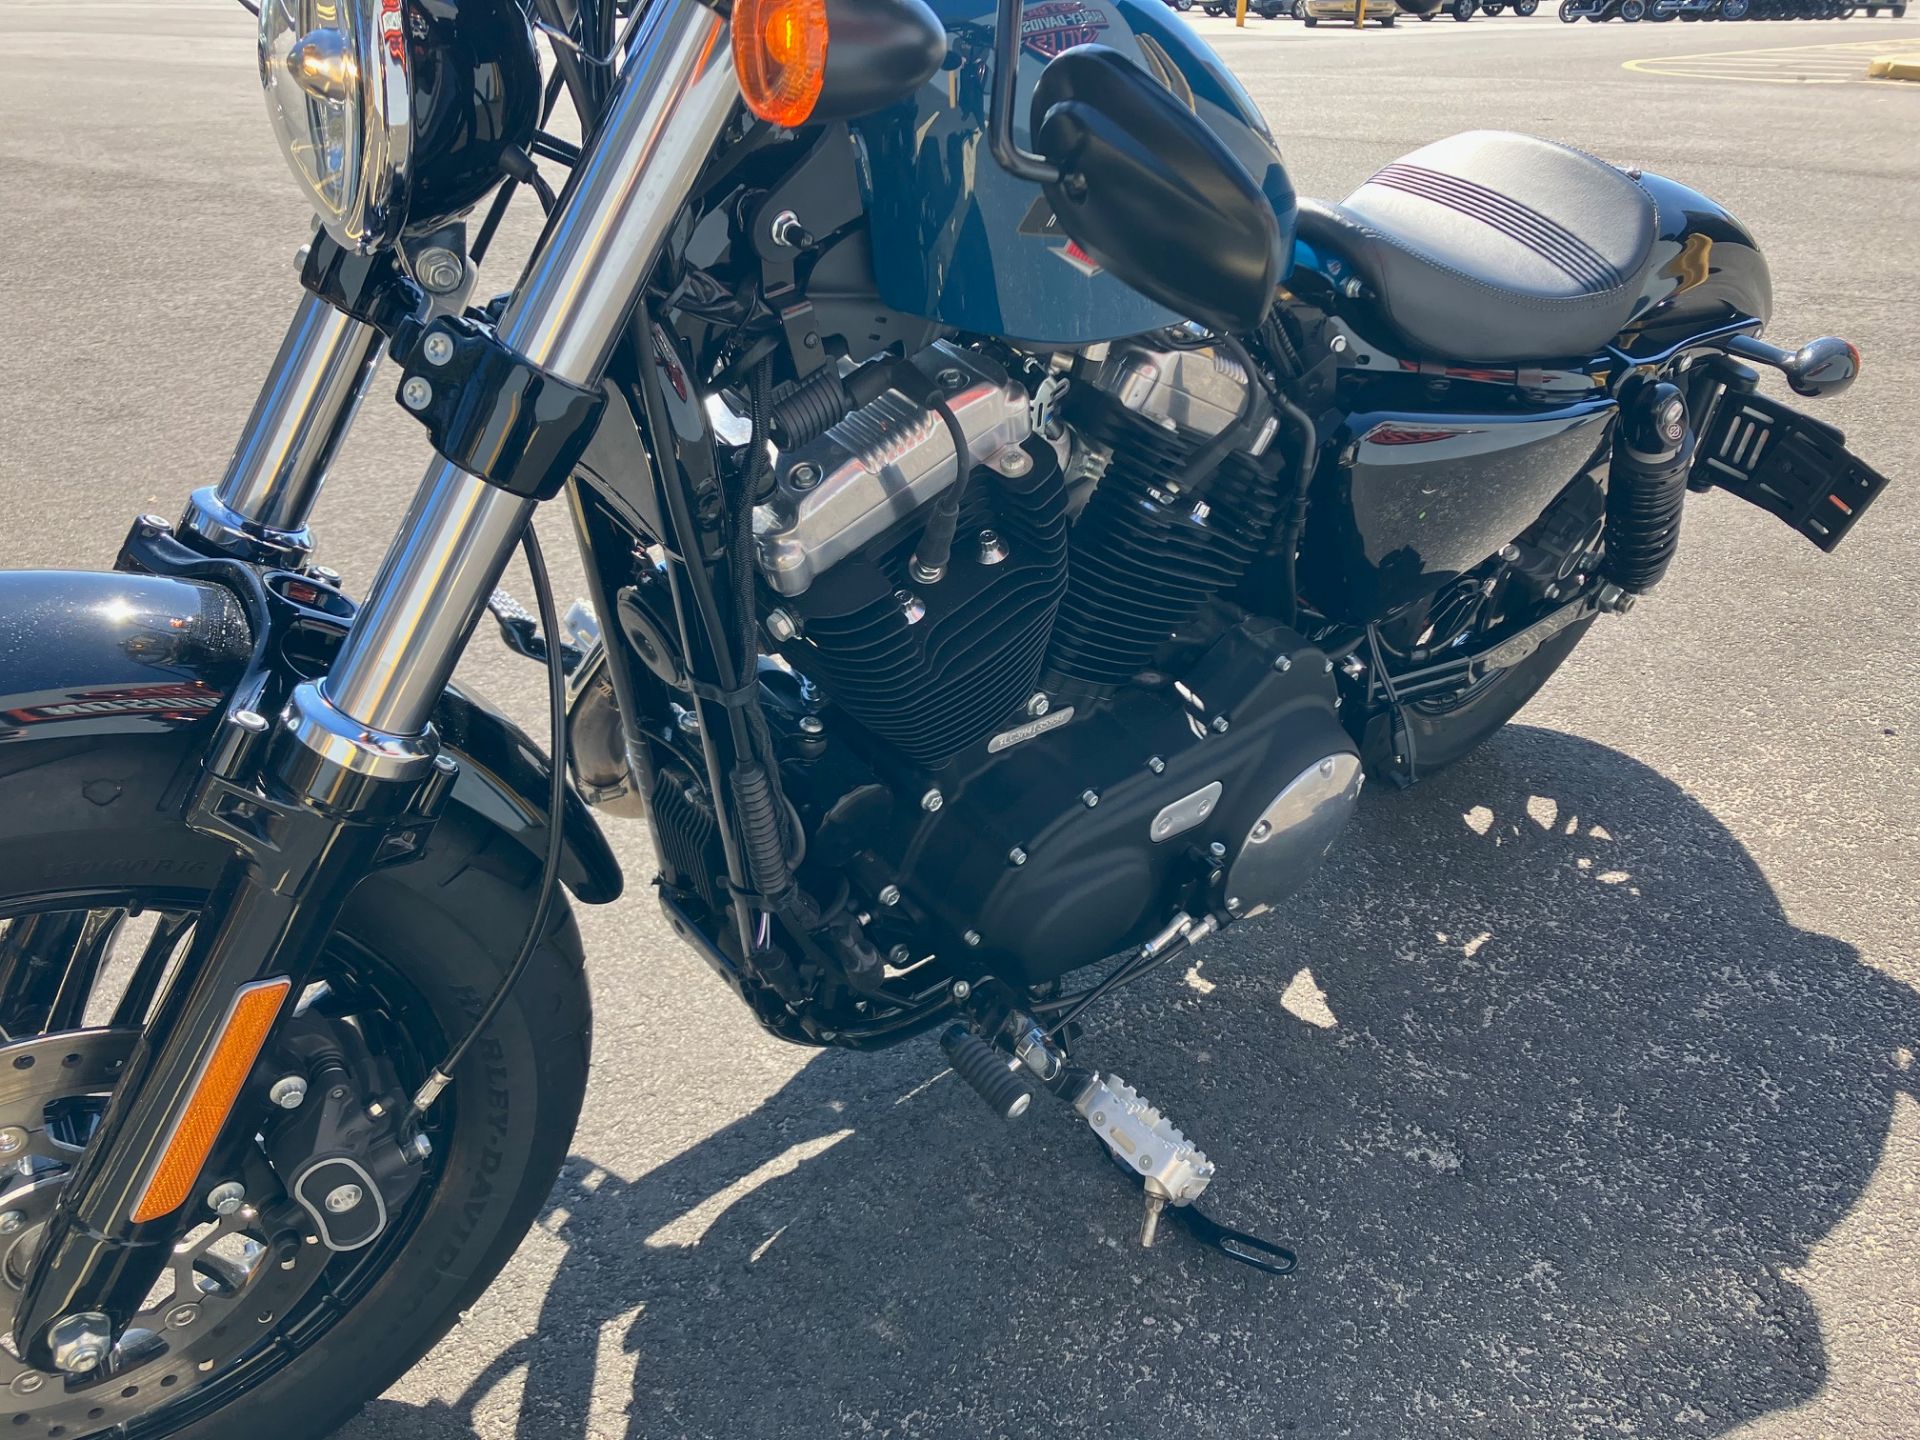 2021 Harley-Davidson FORTY-EIGHT in West Long Branch, New Jersey - Photo 9